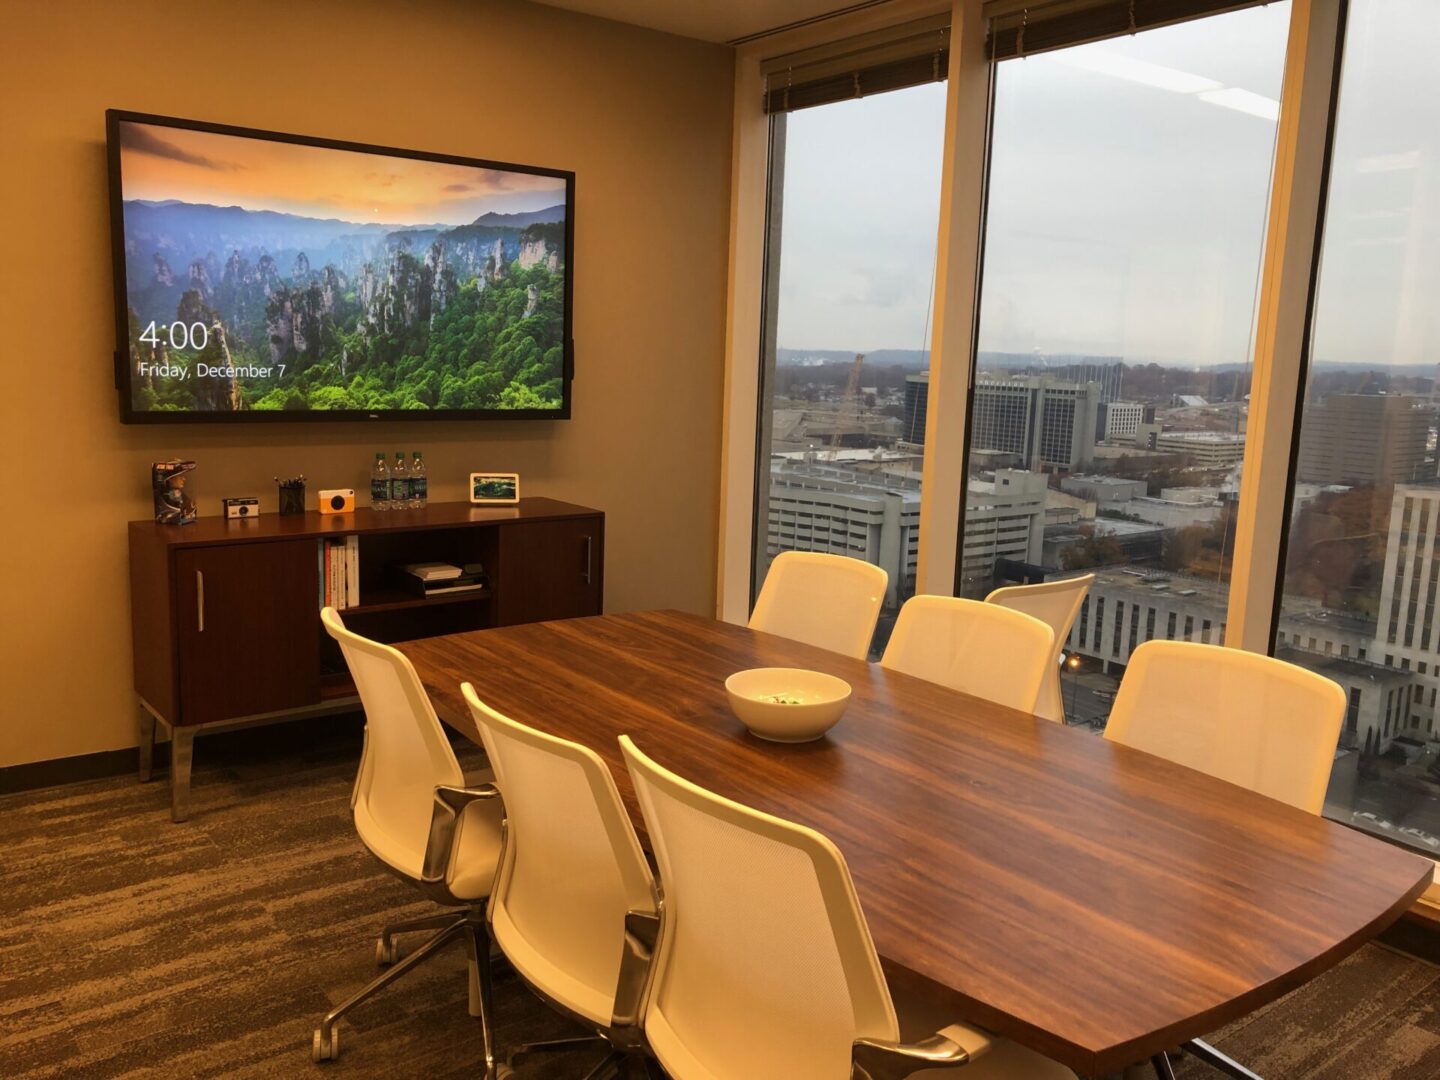 A large conference room with a view of the city.